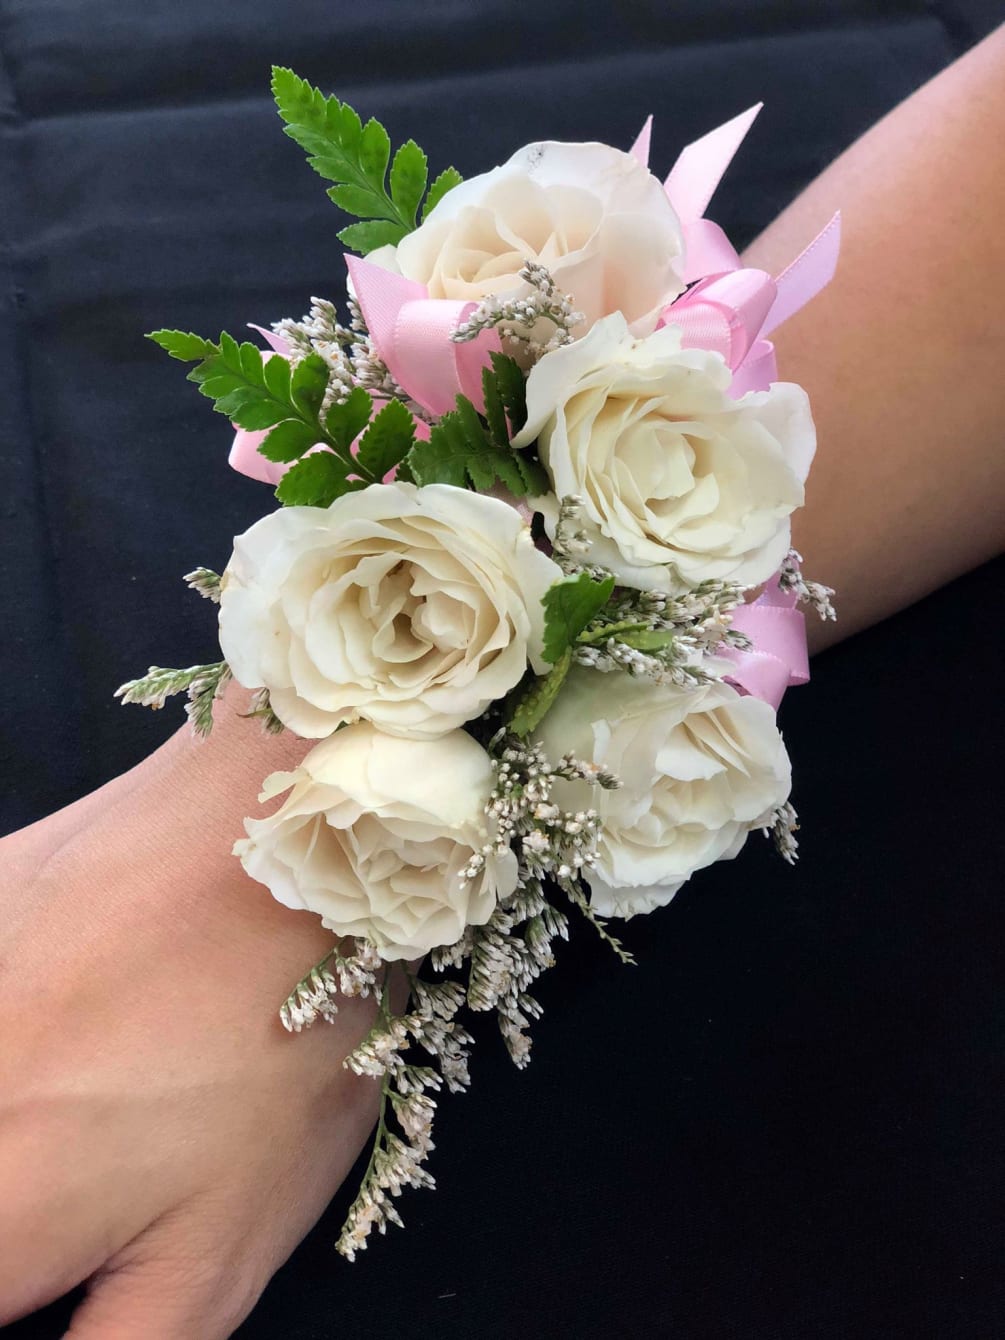 Wrist Corsage (White Flowers & Pink Ribbon) by Bee's Flowers